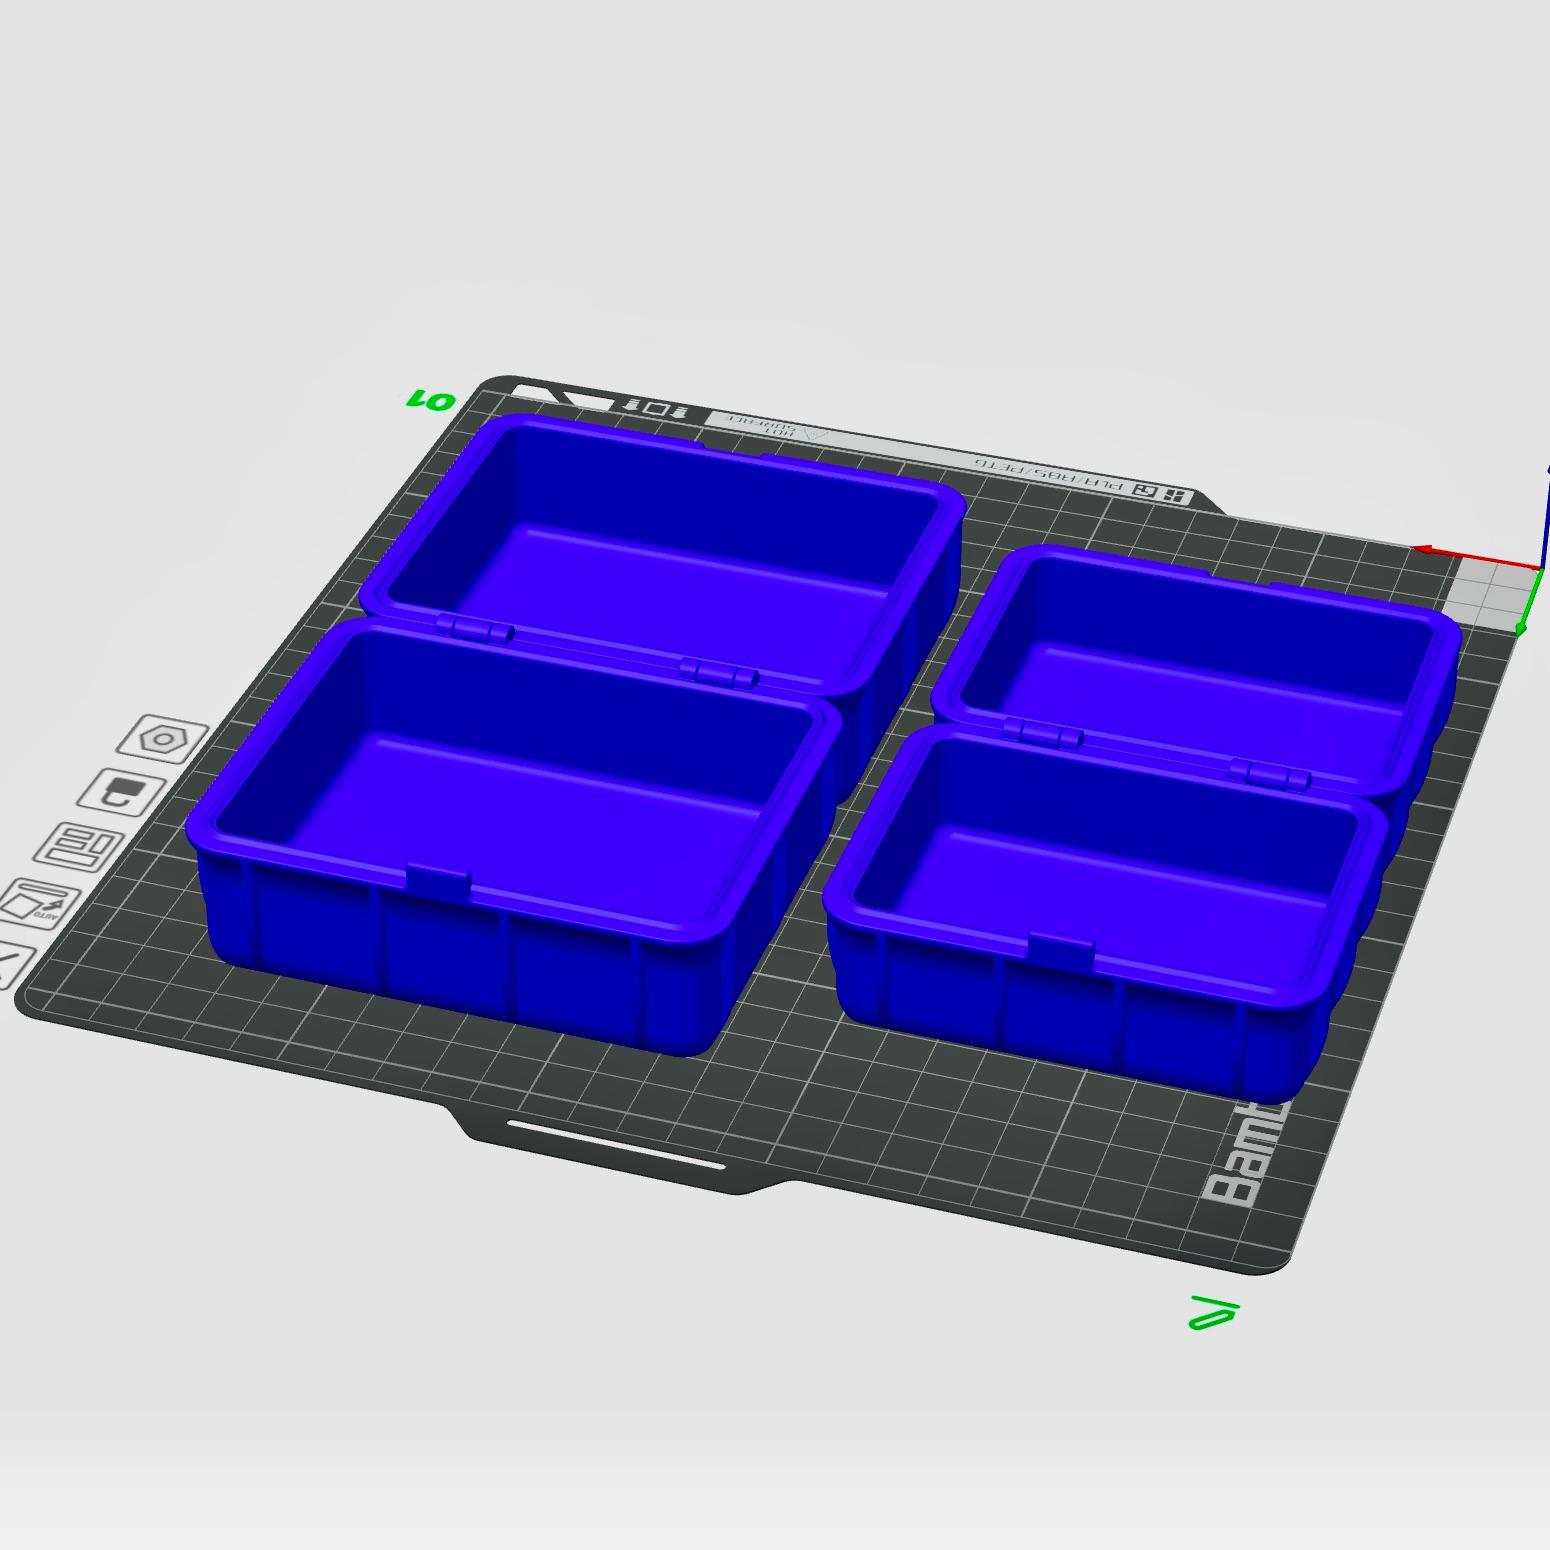 Set of 4 Storage Boxes Print in Place with Snap Lock 3d model